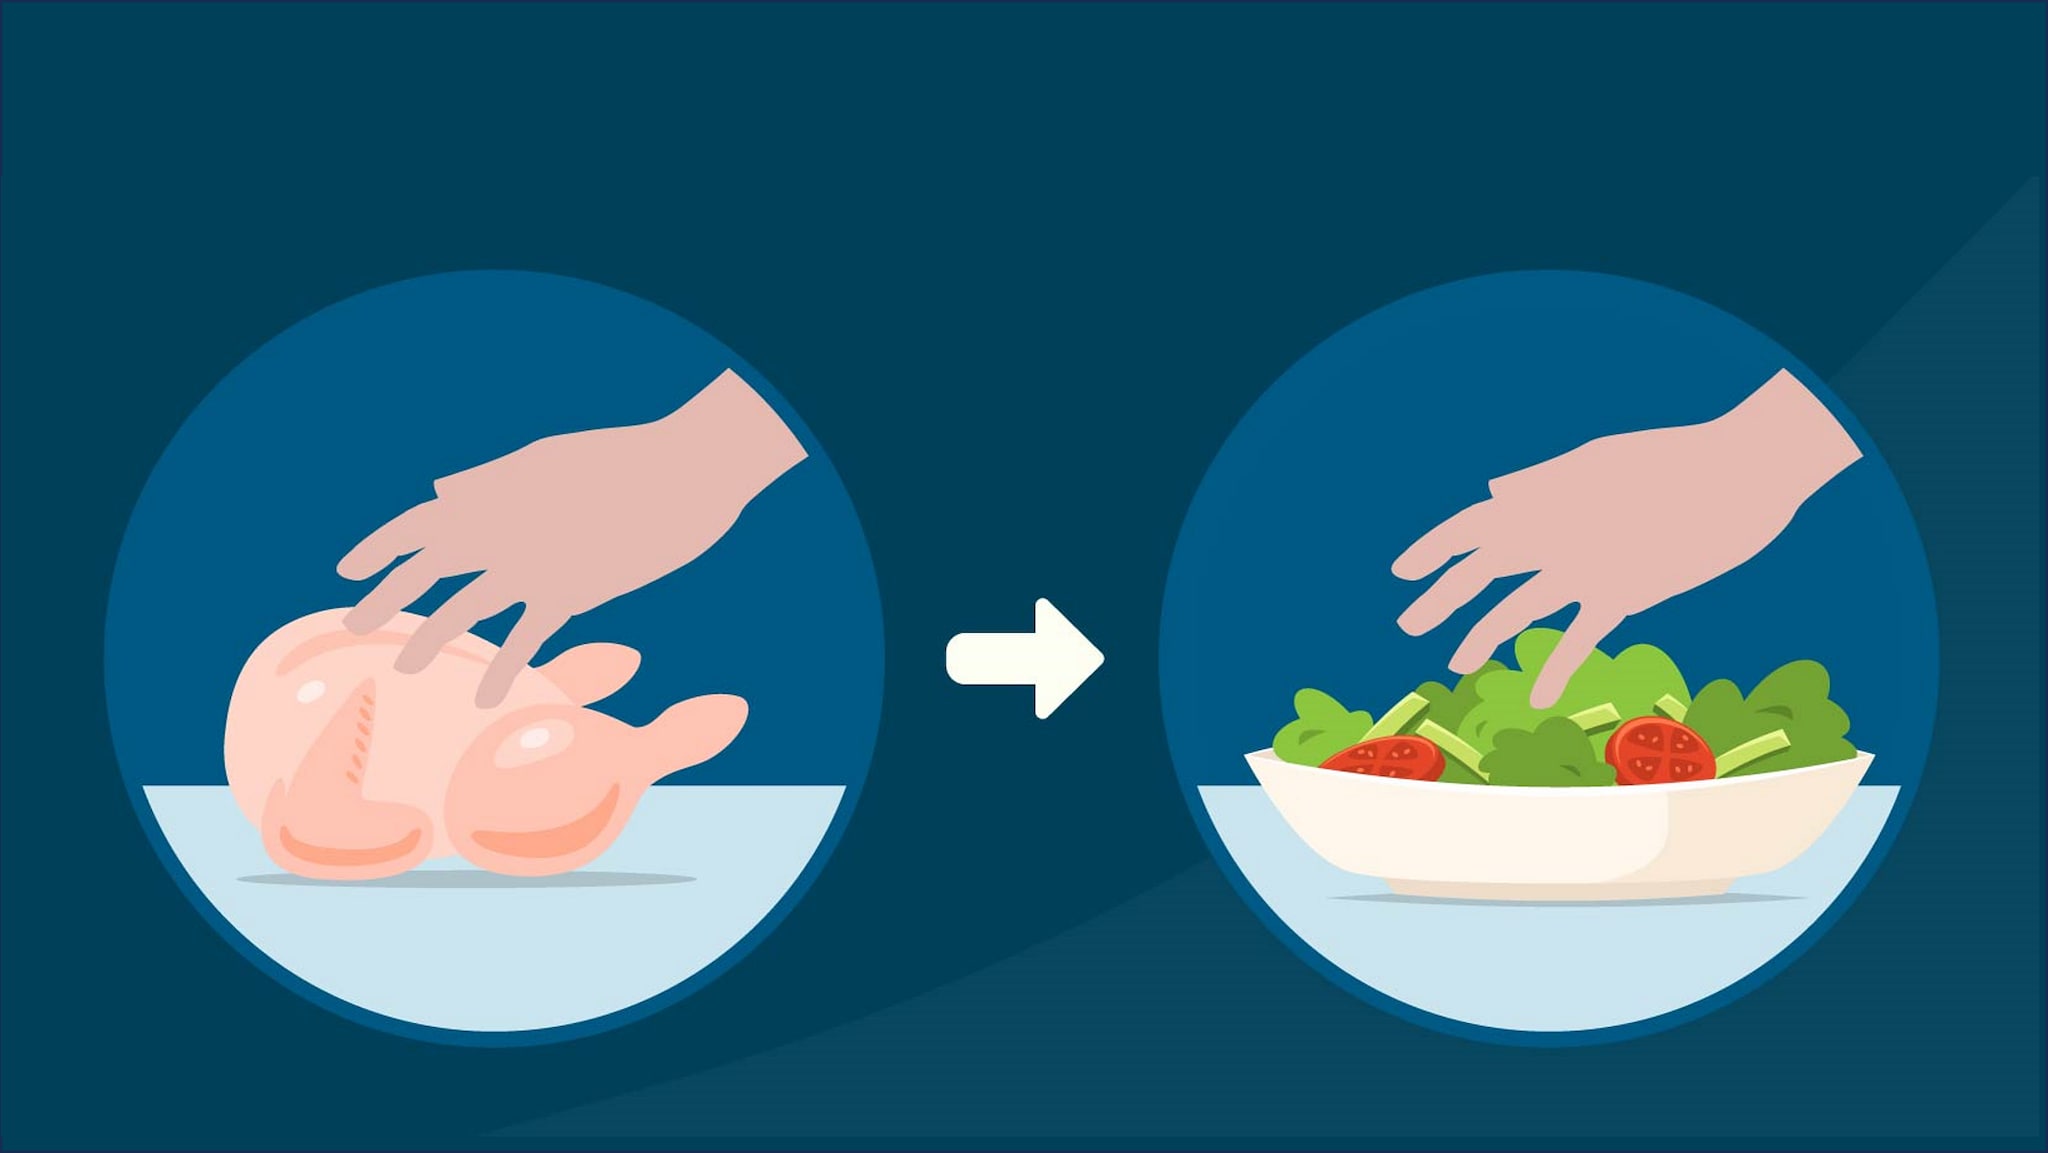 Two circle graphics of hands working with food. The circle on the left, the hand is touching raw chicken; and the circle on the right, the hand is touching fresh salad.